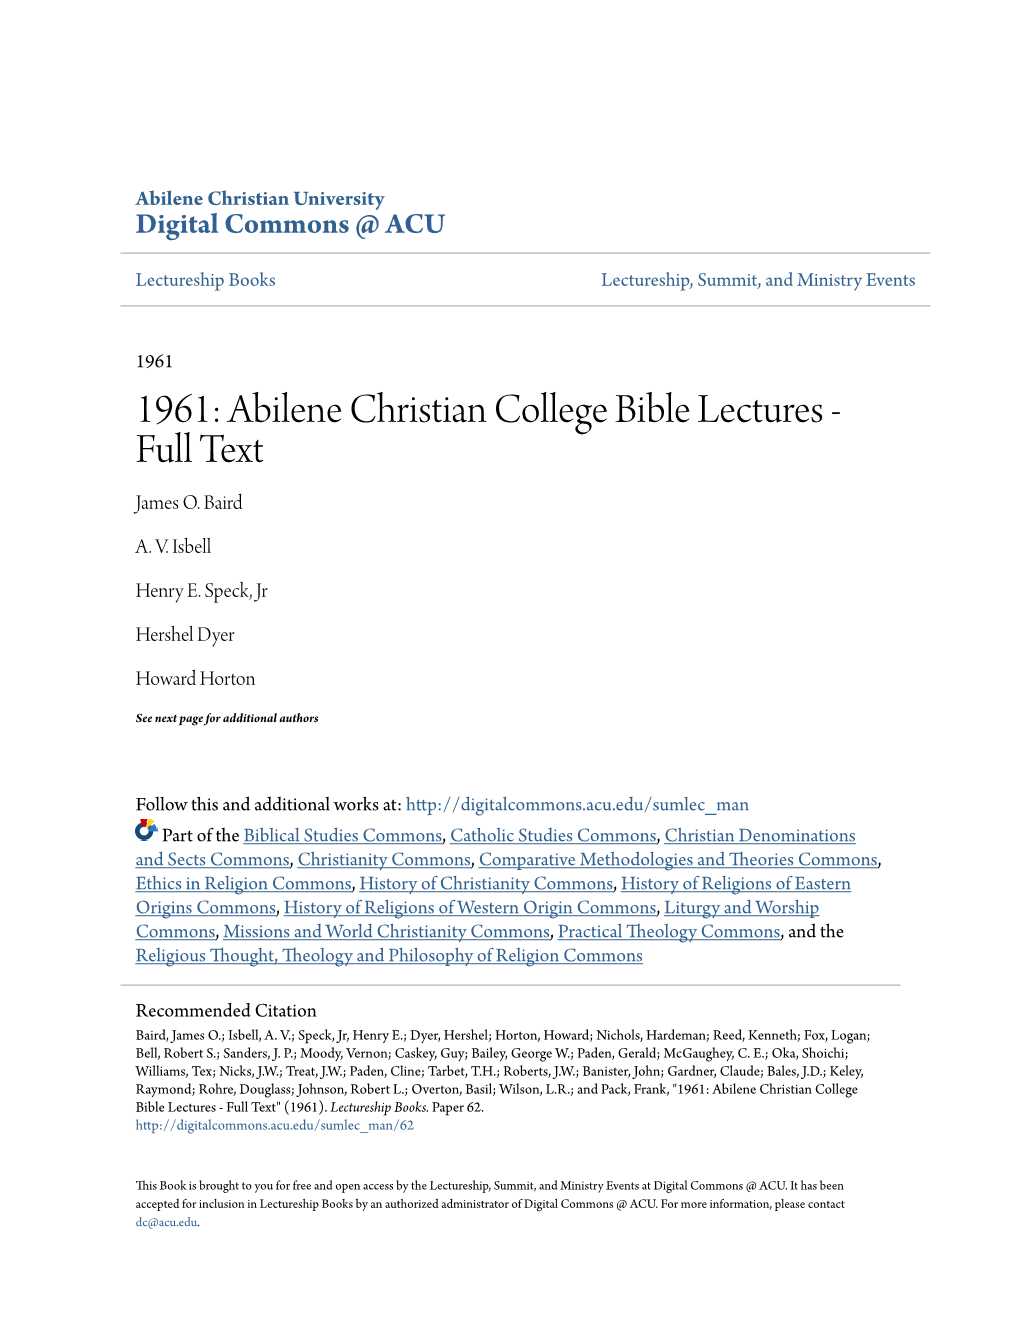 Abilene Christian College Bible Lectures - Full Text James O